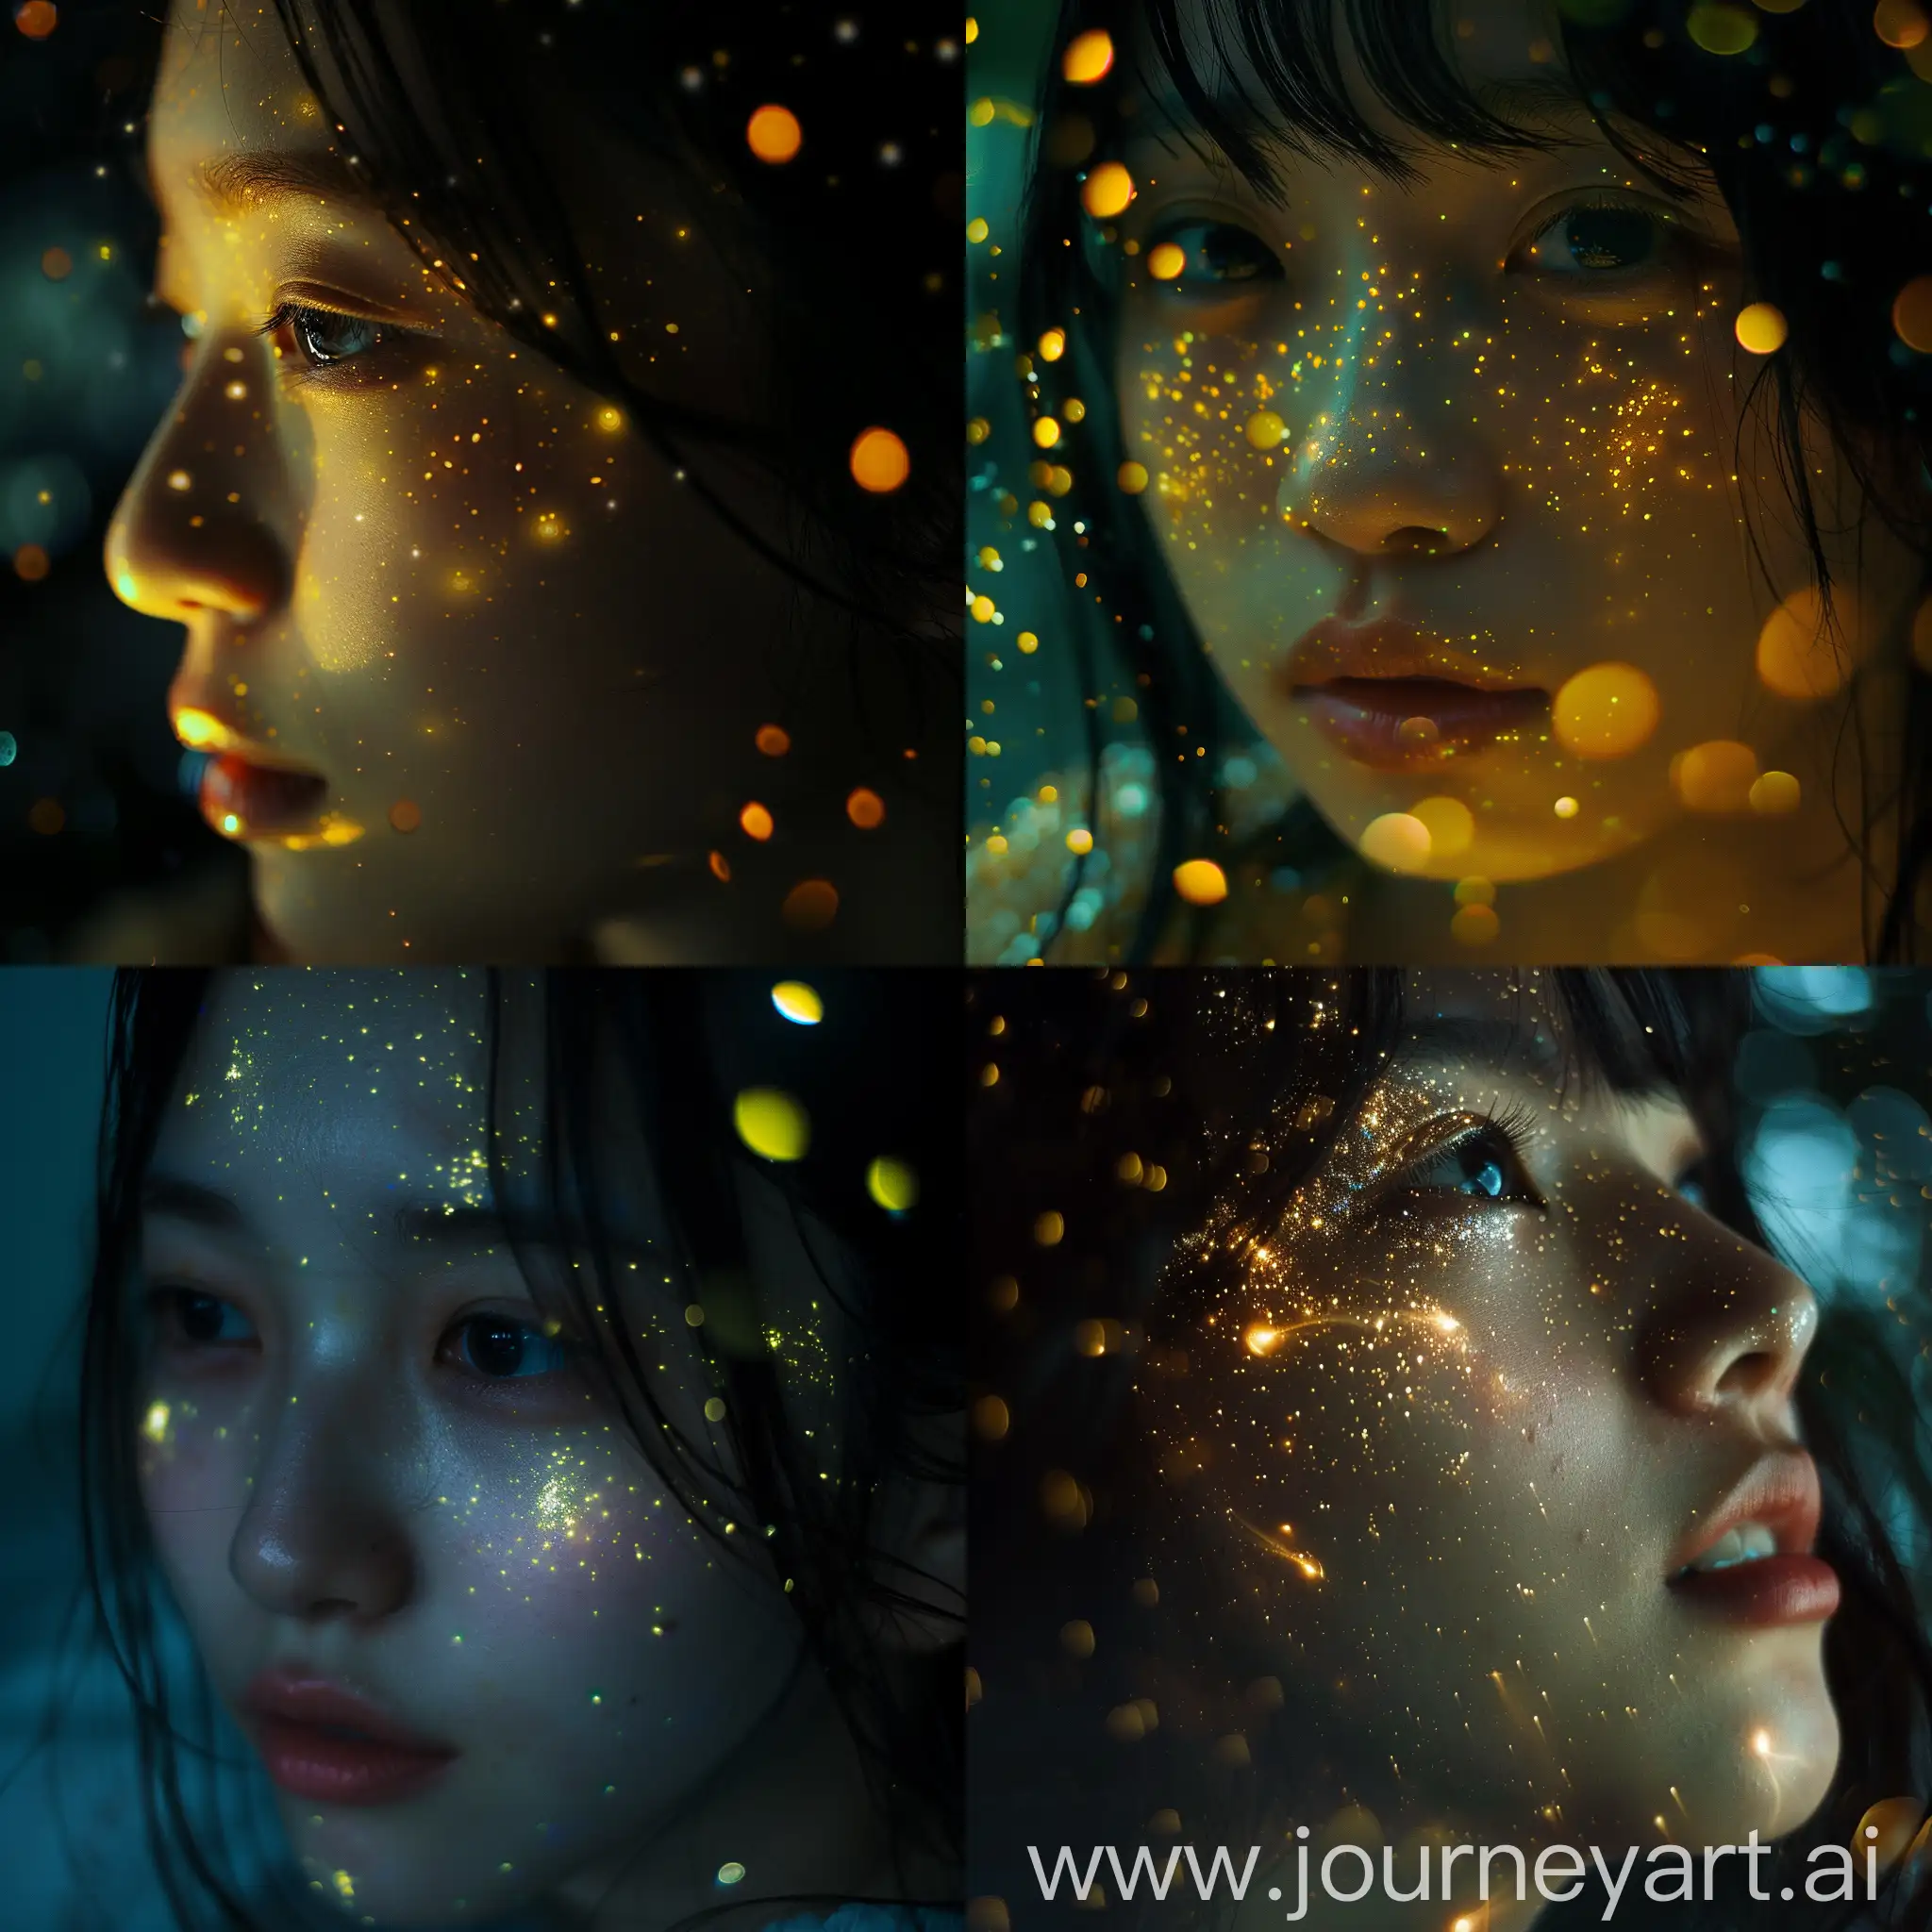 Japan girl face, looking to the sky. Alot of fireflies, many fireflies at face, bokeh, lot of fireflies flare on face. Glowing Glittery face.laser light pointed to face. Dark room.